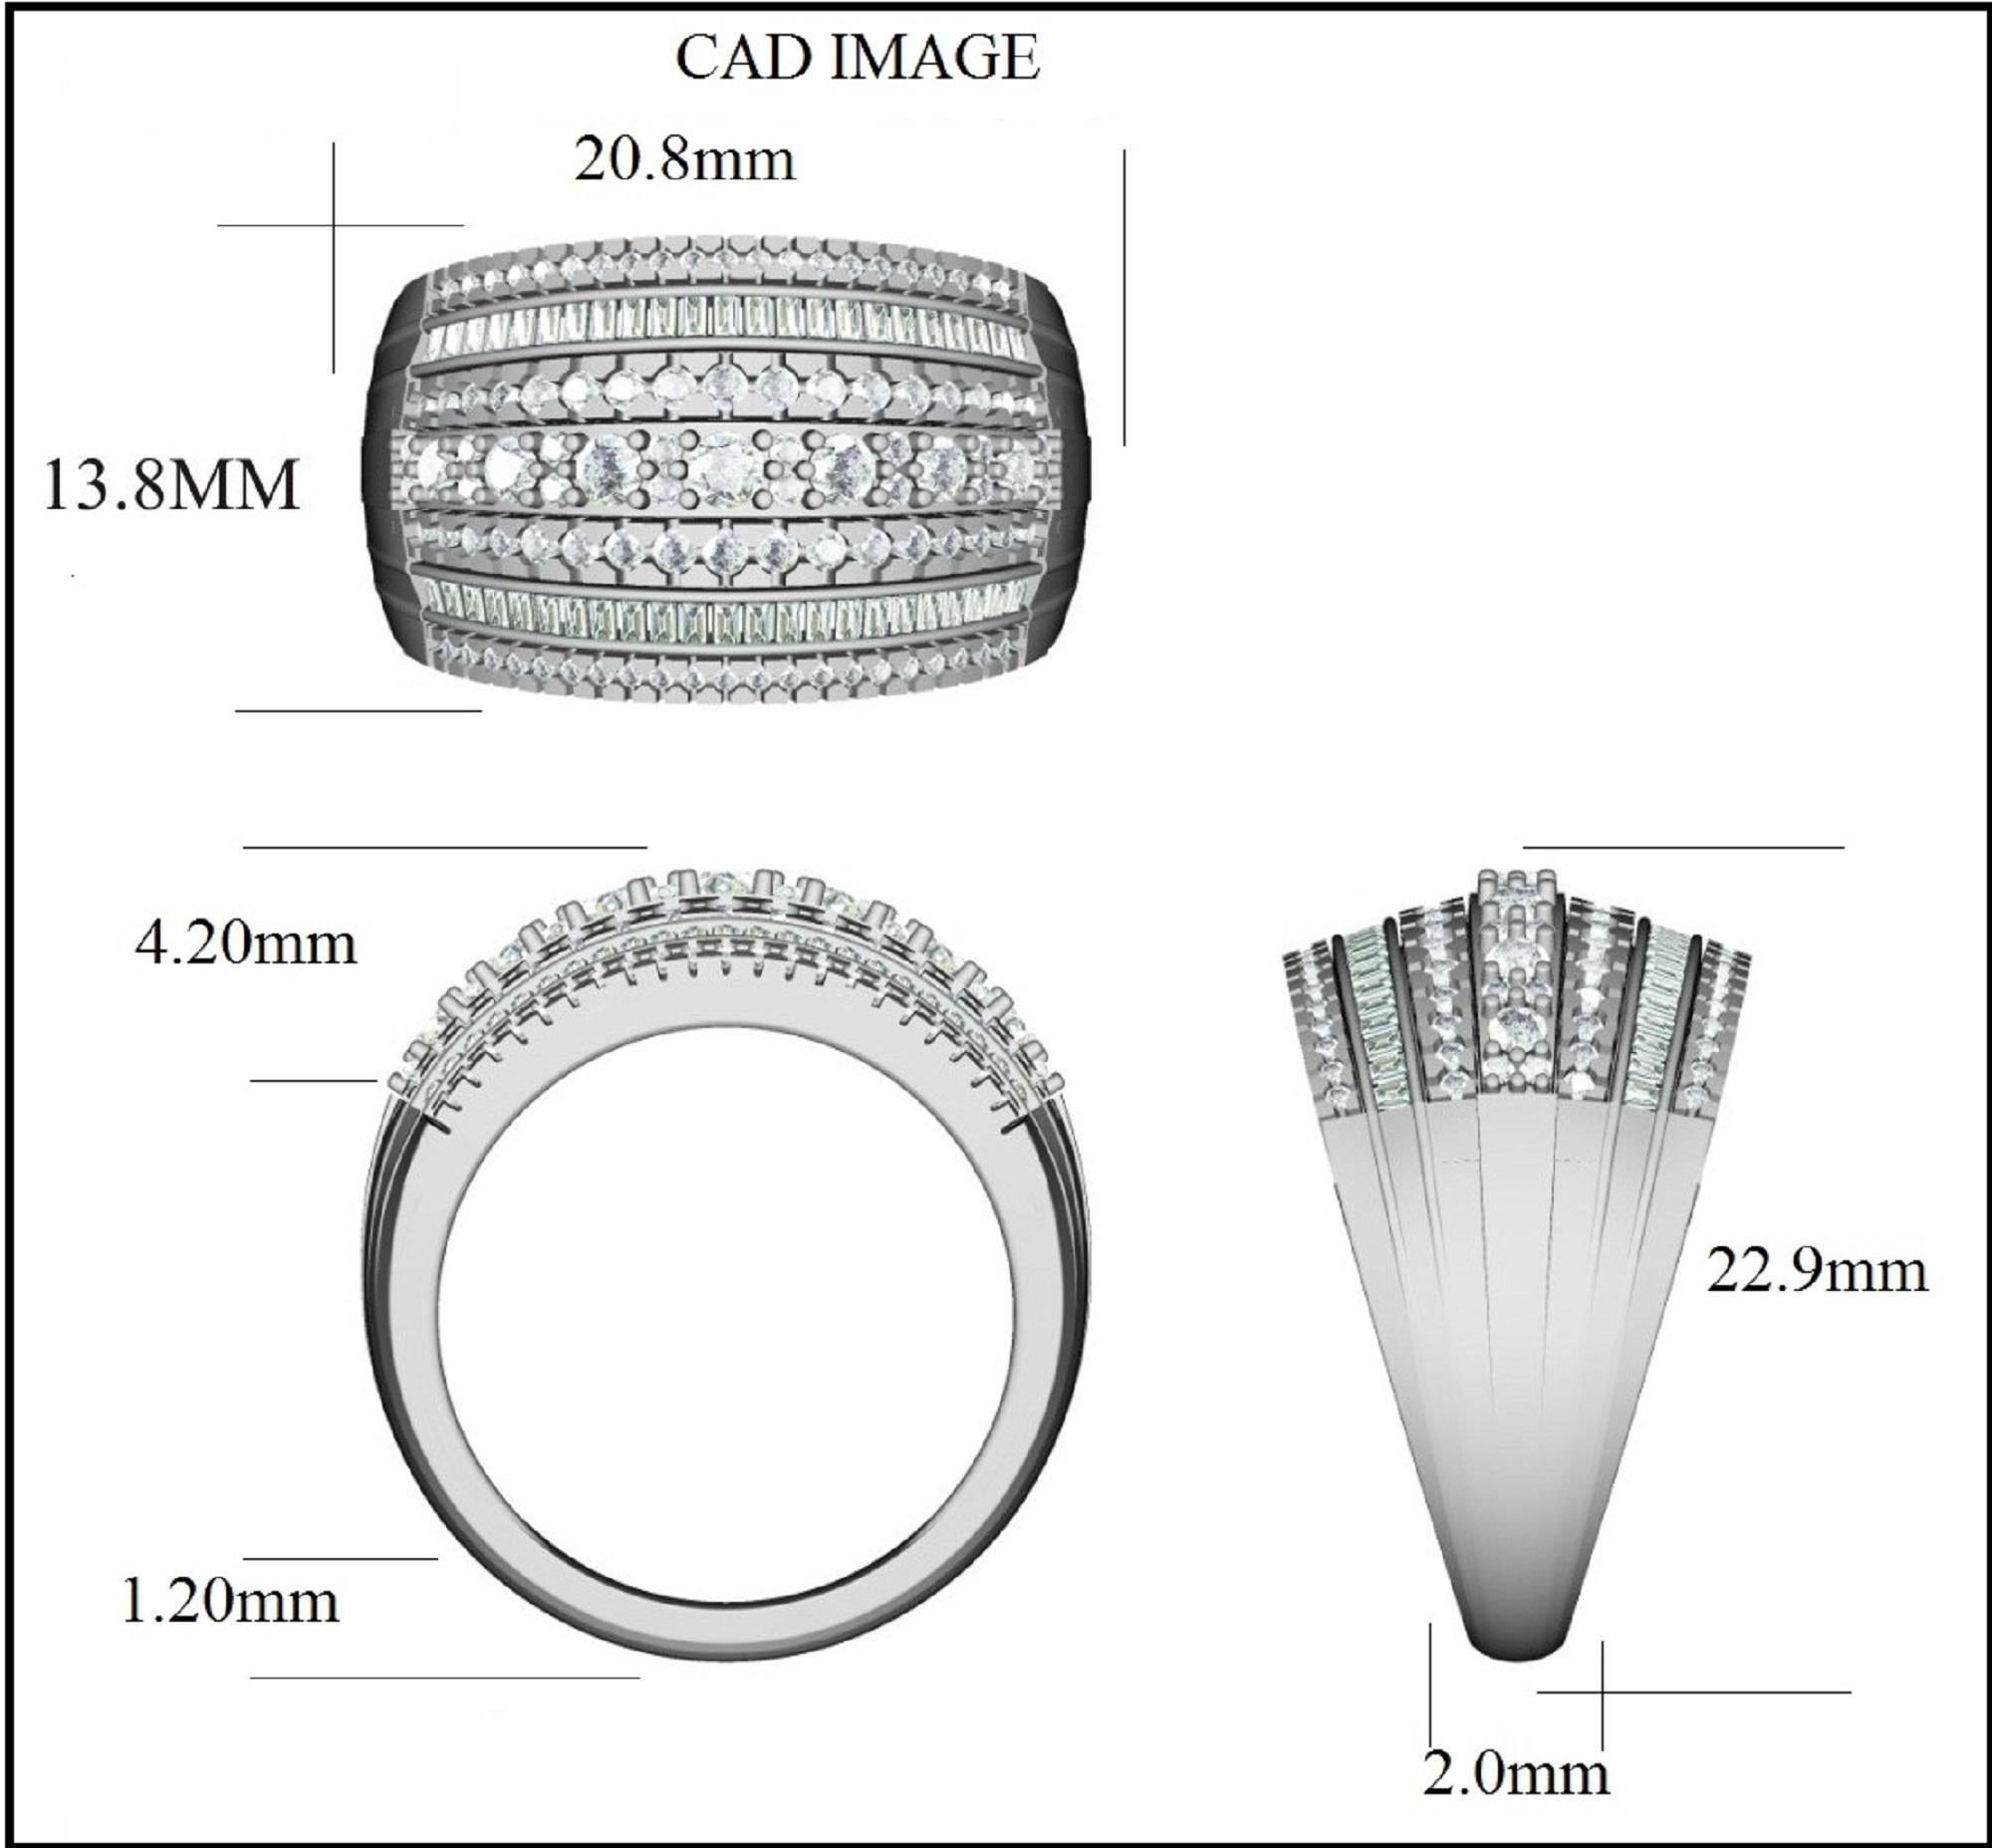 Truly exquisite, this  Multi row wide diamond  ring is sure to be admired for the inherent classic beauty and elegance within its design. The total weight of diamonds 1.00 carat, H-I color, I2 Clarity. This ring is beautifully crafted in 14K White